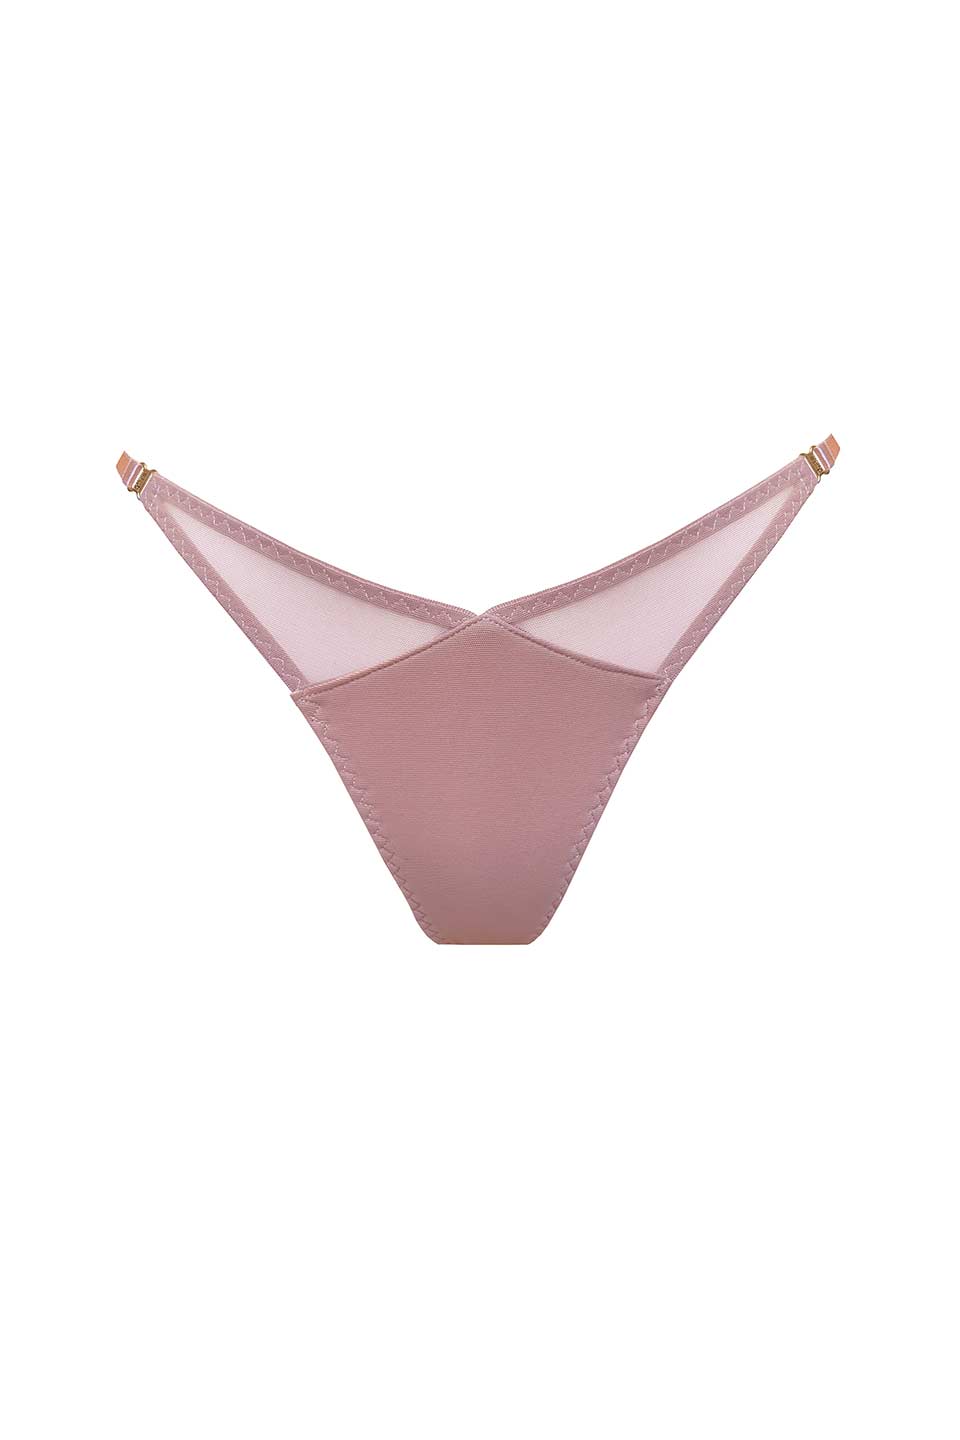 Atelier bordelle kora thong rose front. Product gallery 1